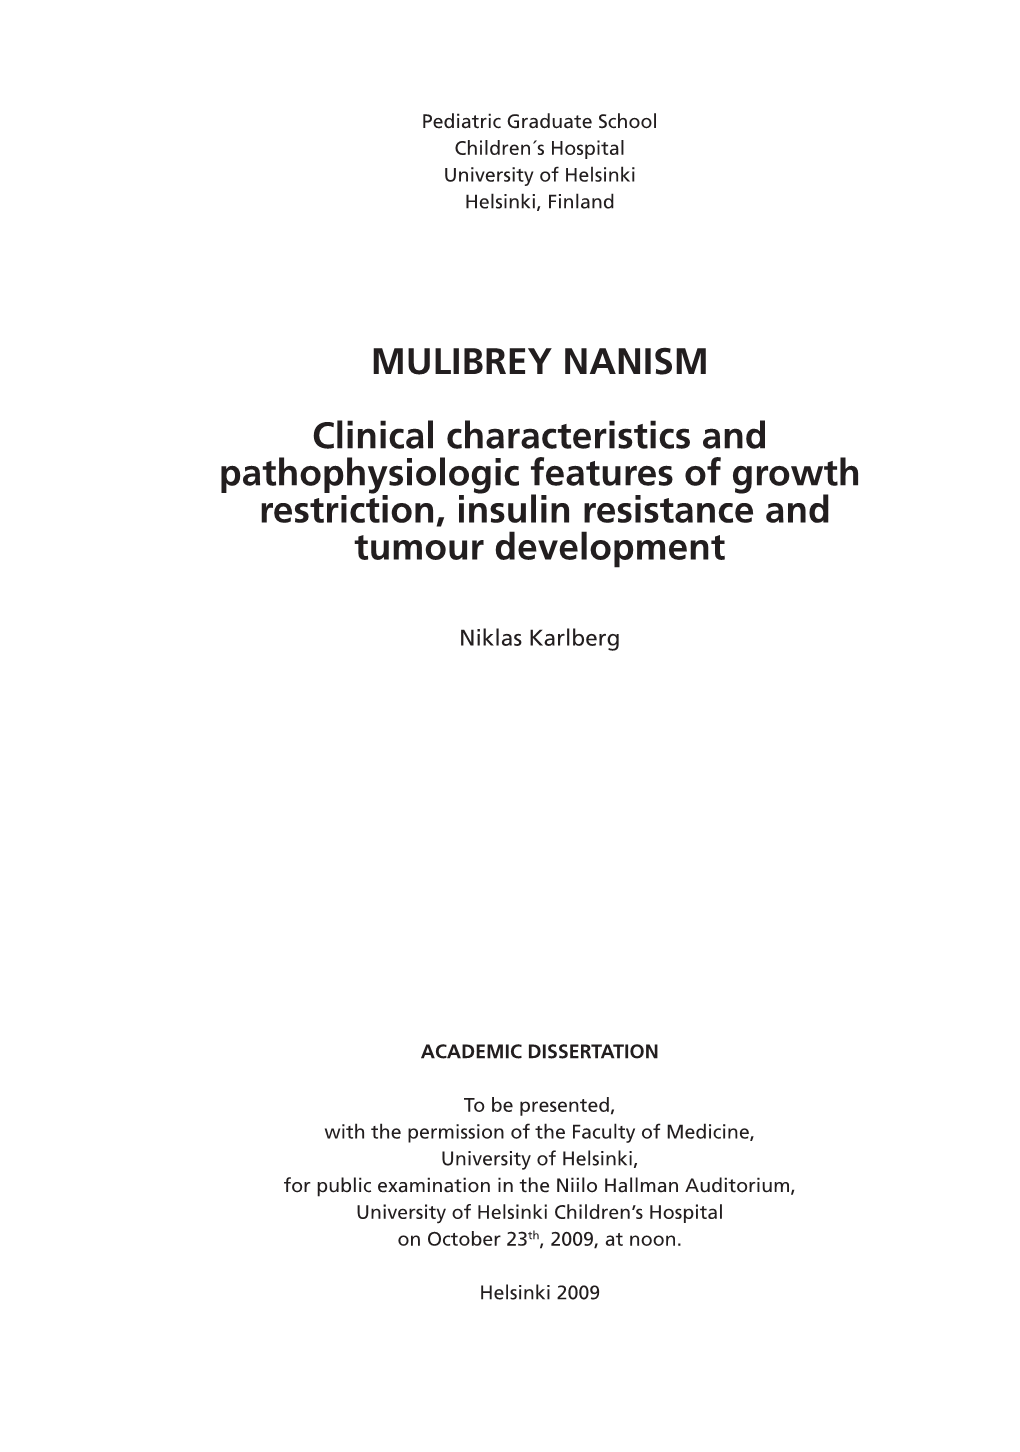 MULIBREY NANISM Clinical Characteristics and Pathophysiologic Features of Growth Restriction, Insulin Resistance and Tumour Development